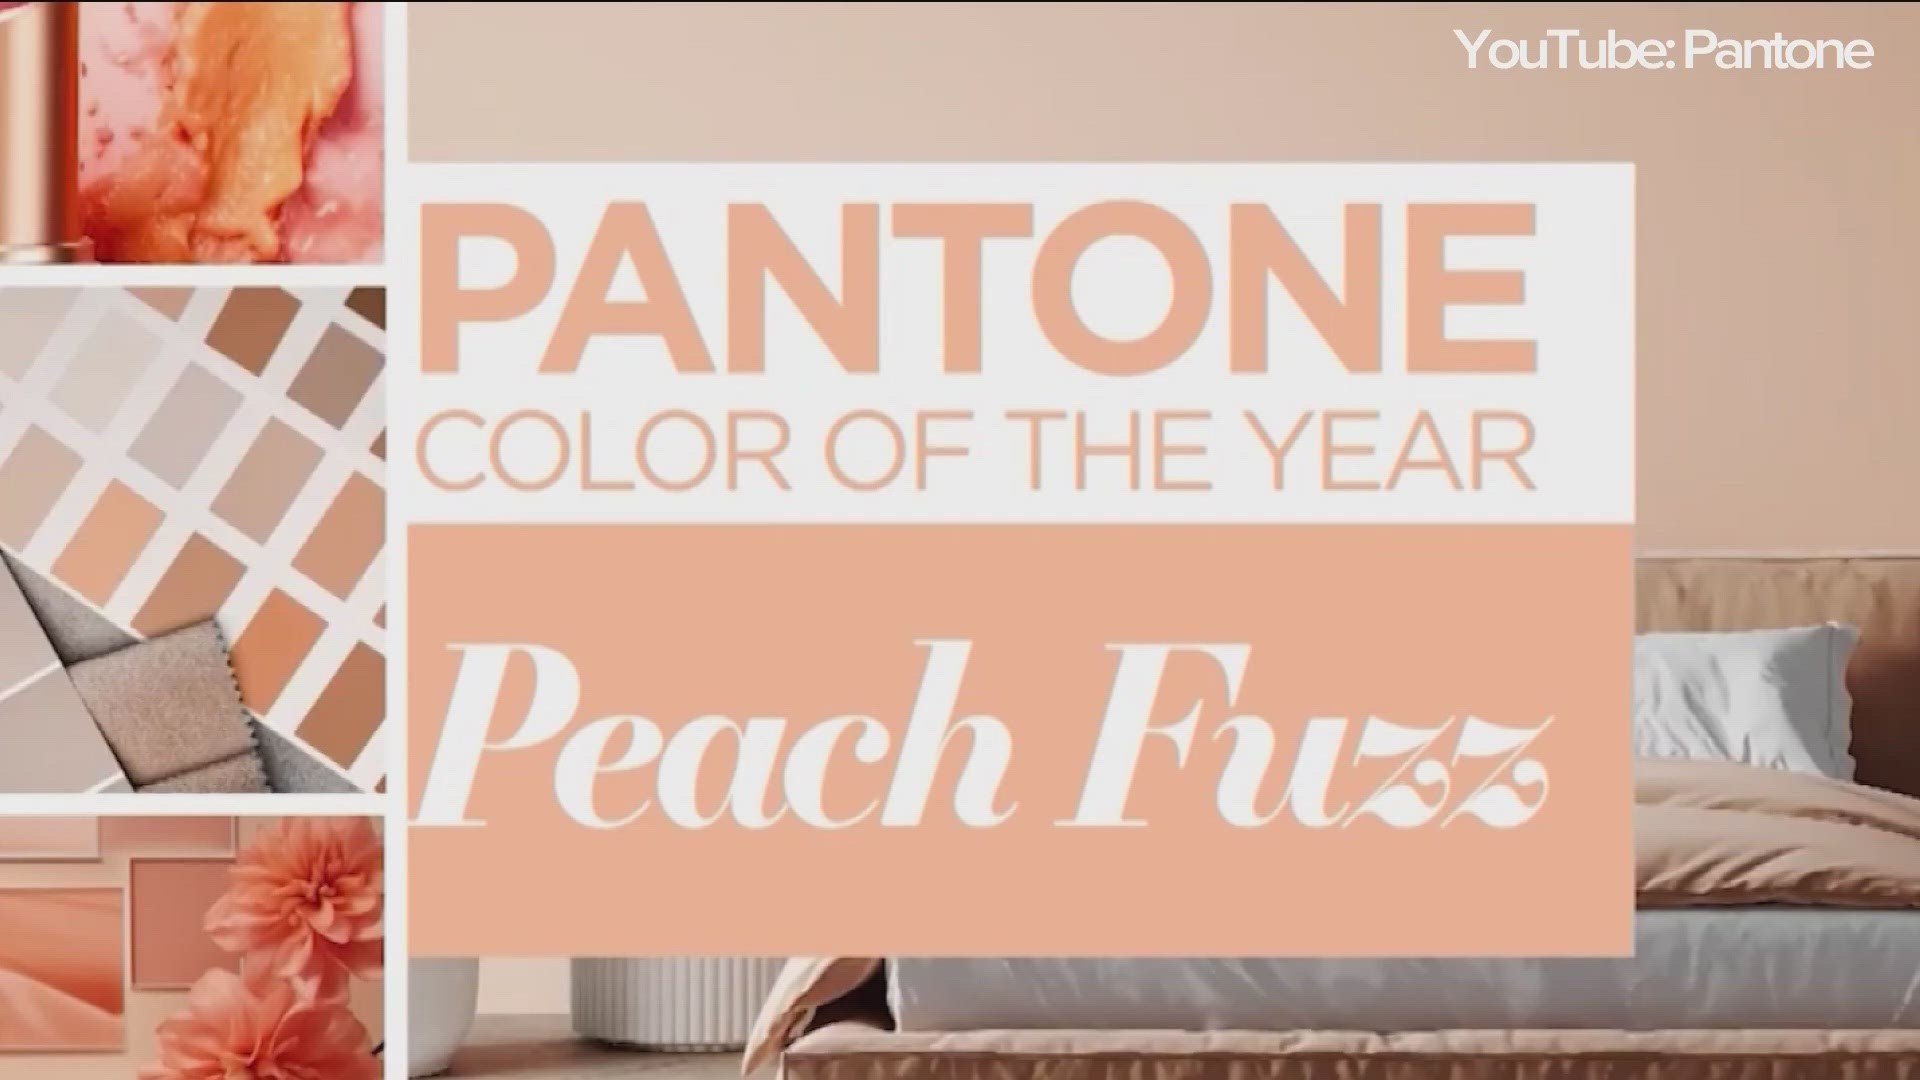 See peach fuzz, Pantone's color of the year for 2024 - CBS News